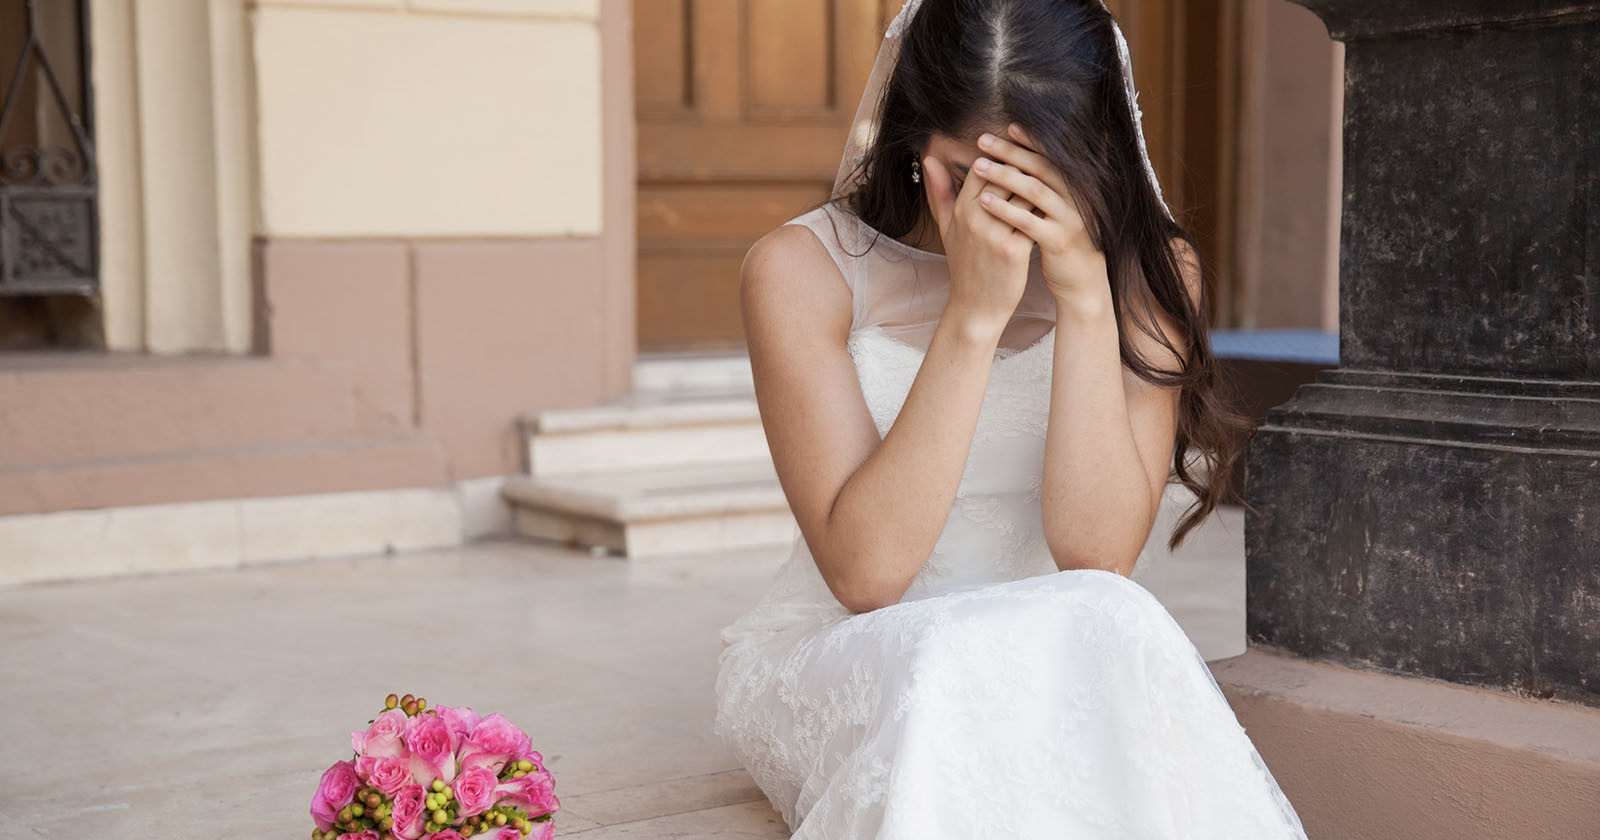  brides waiting refunds from no-show wedding photographer 